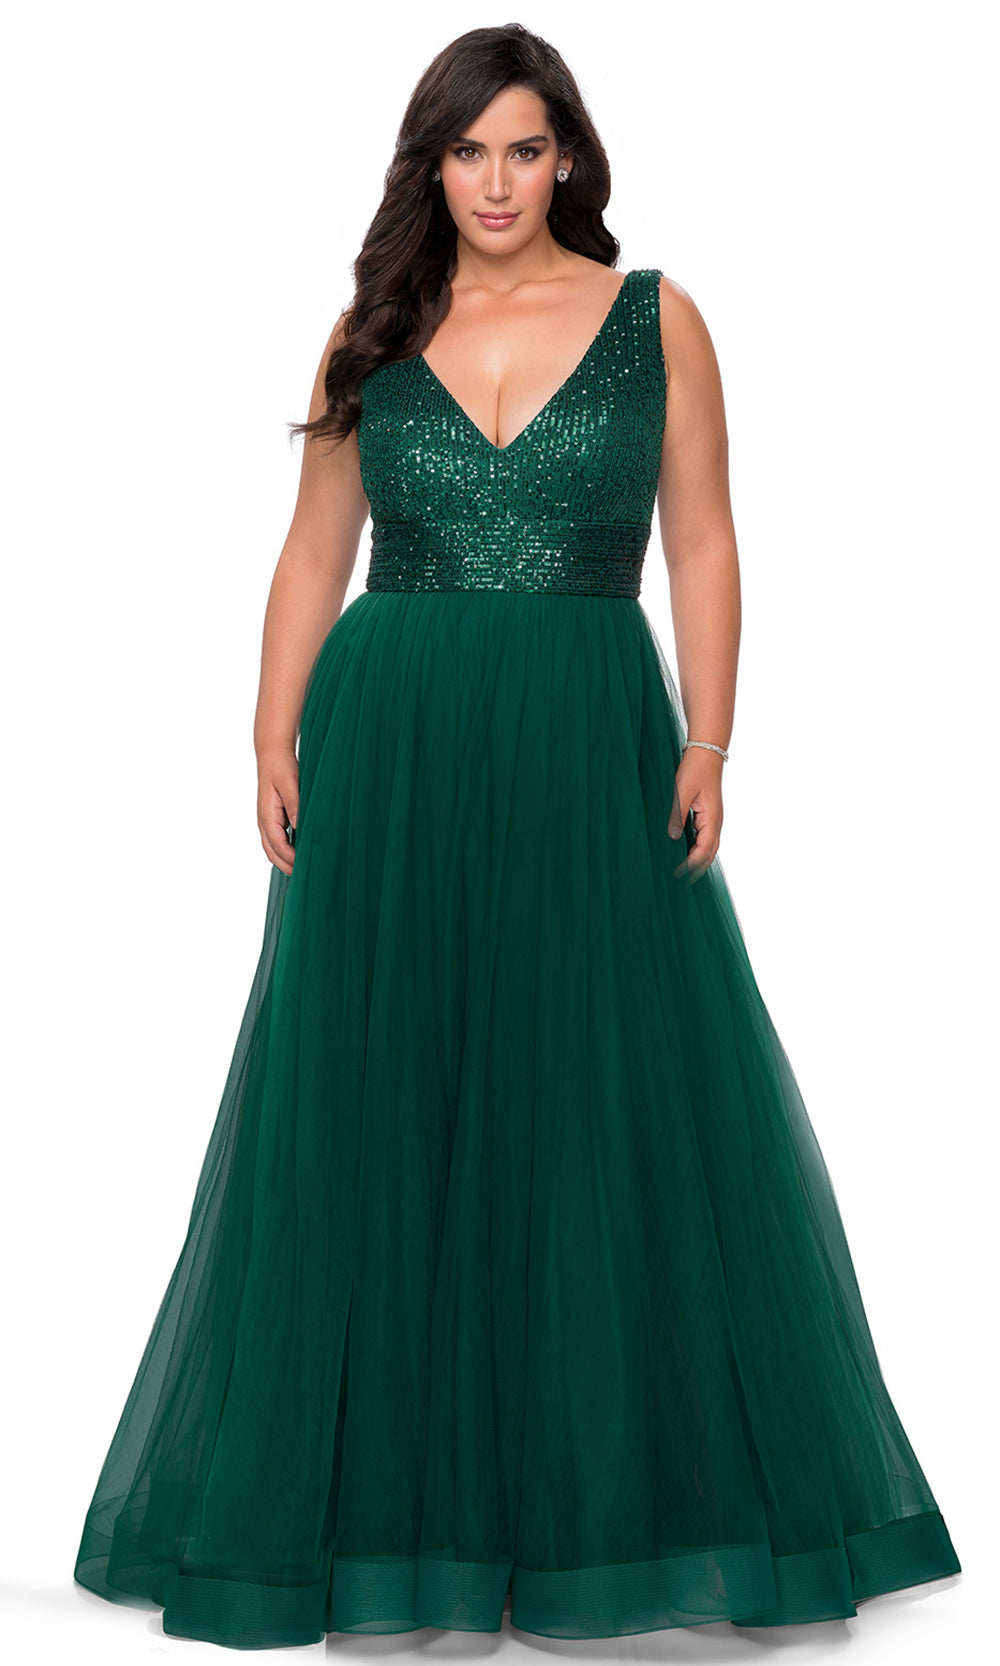 La Femme - 29045 Sequined Deep V Neck Tulle A-Line Gown In Green